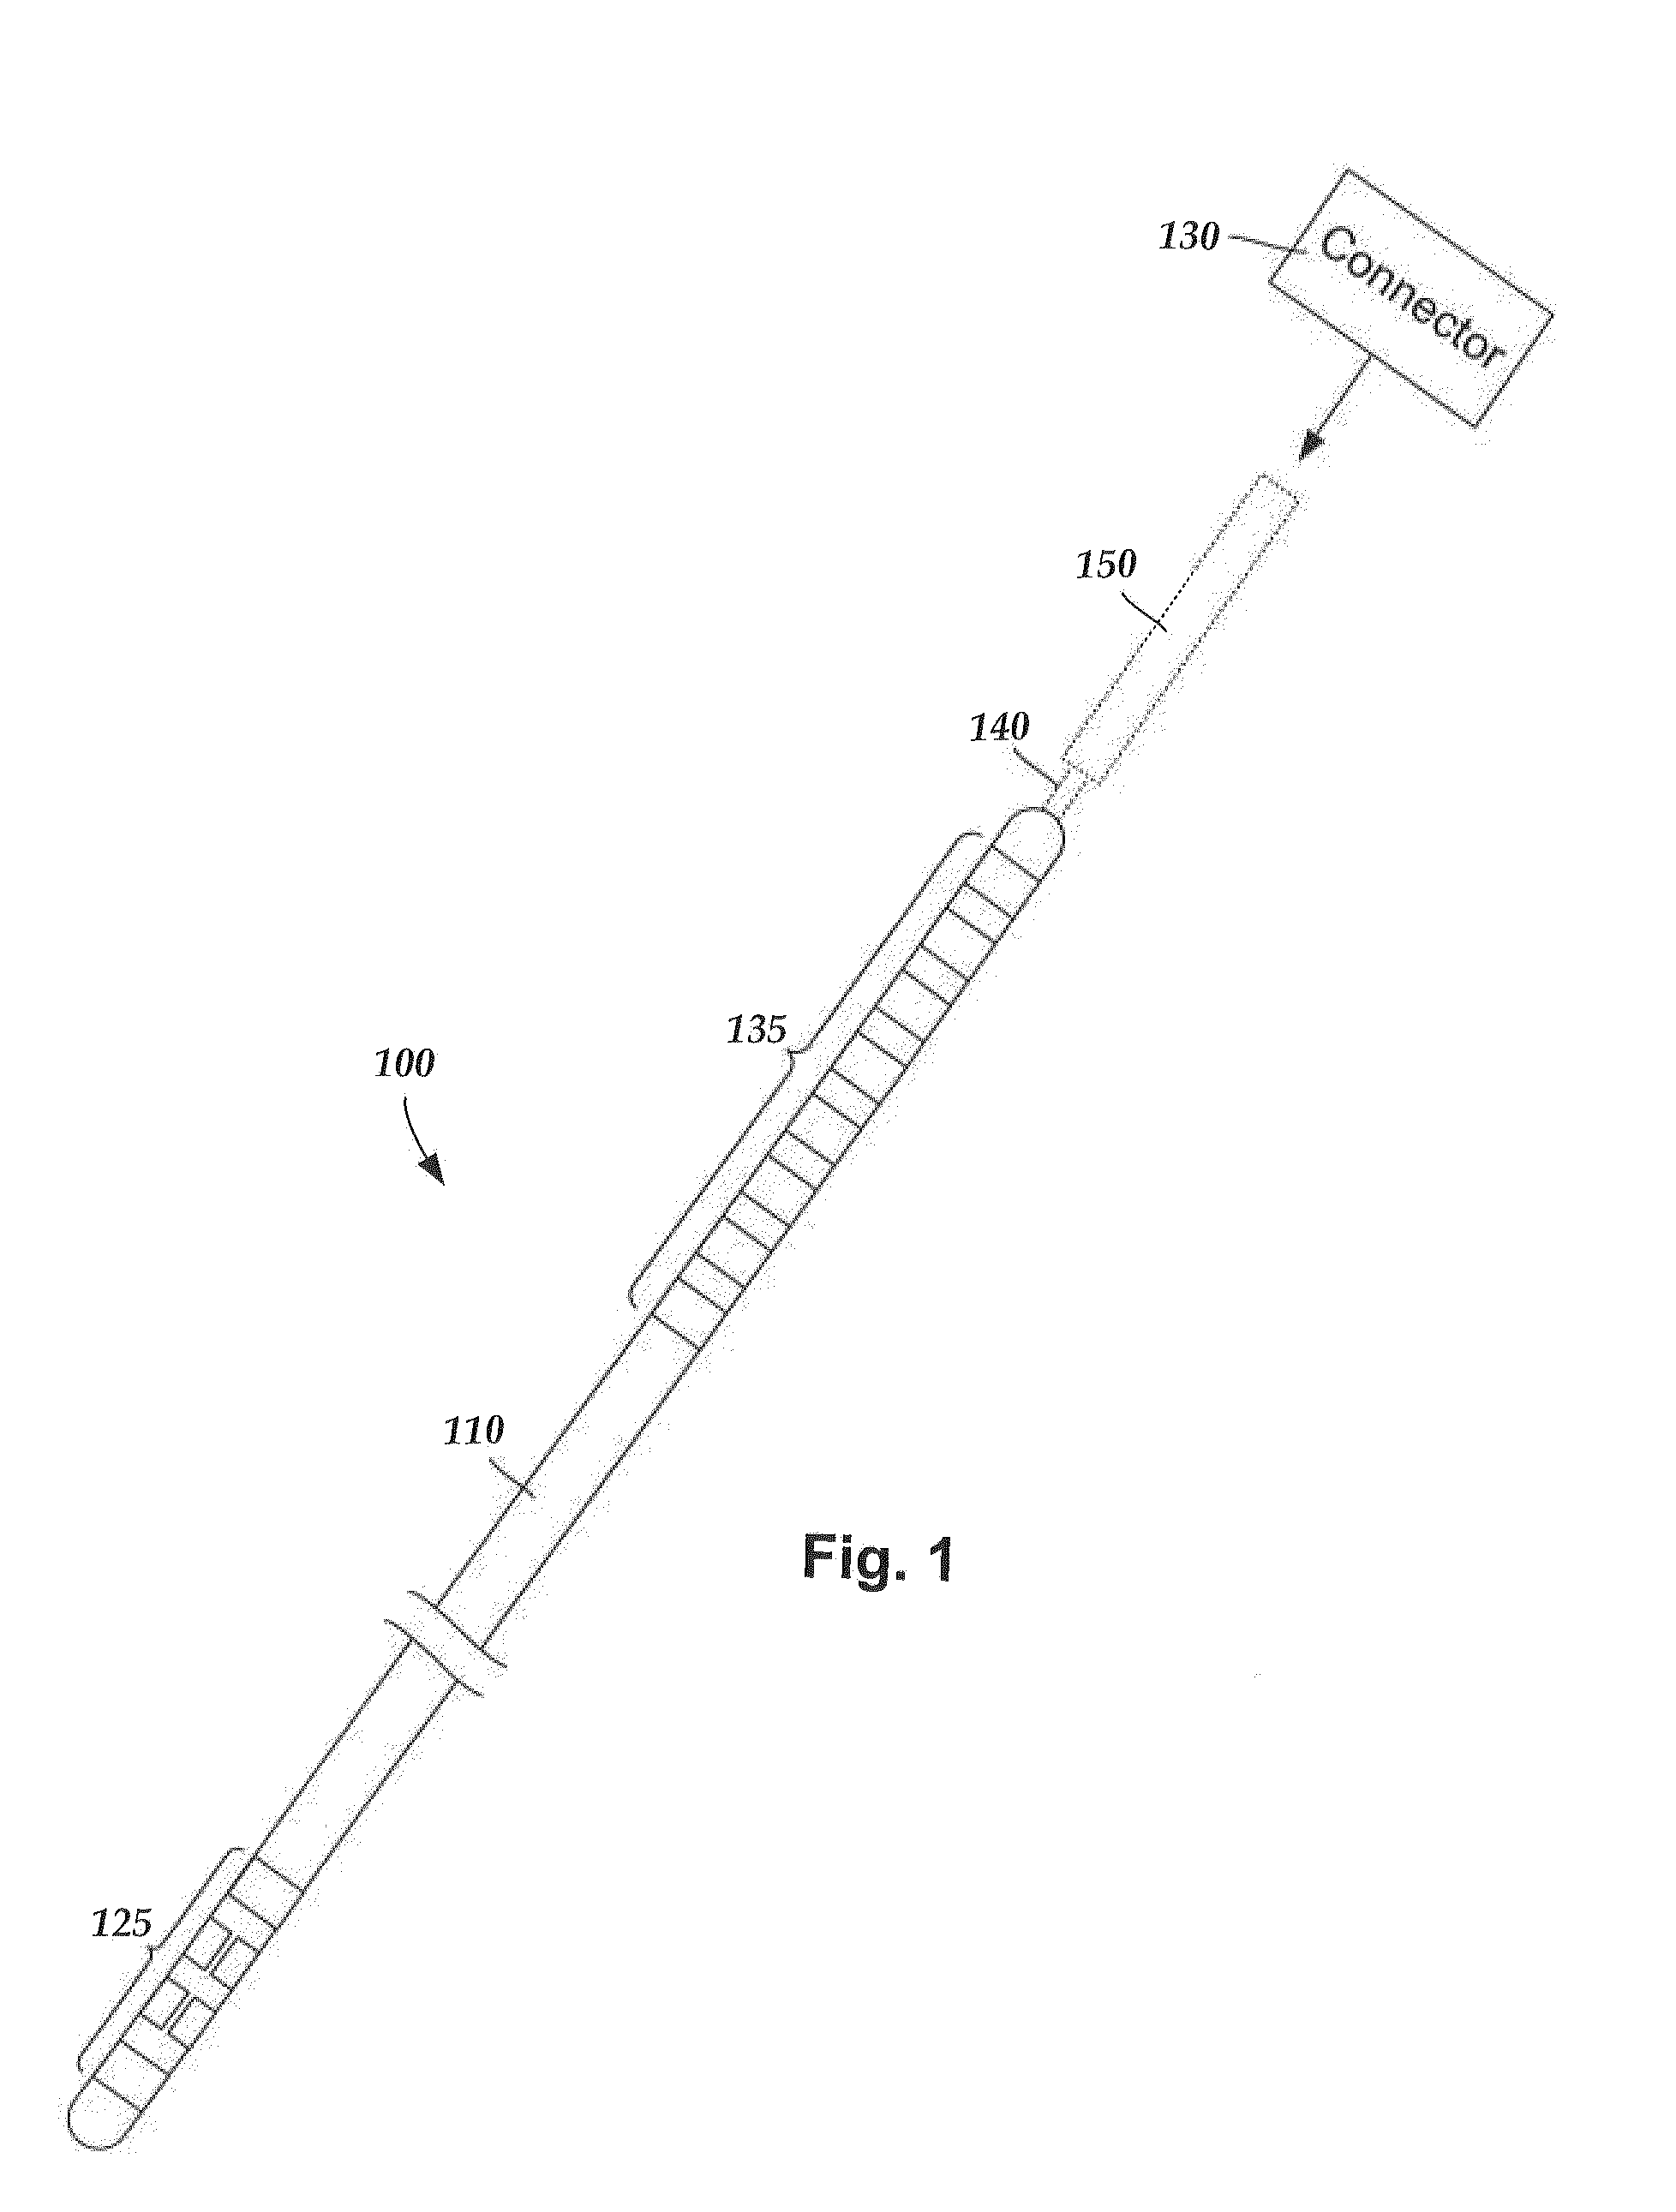 Segmented electrode leads formed from pre-electrodes with alignment features and methods of making and using the leads